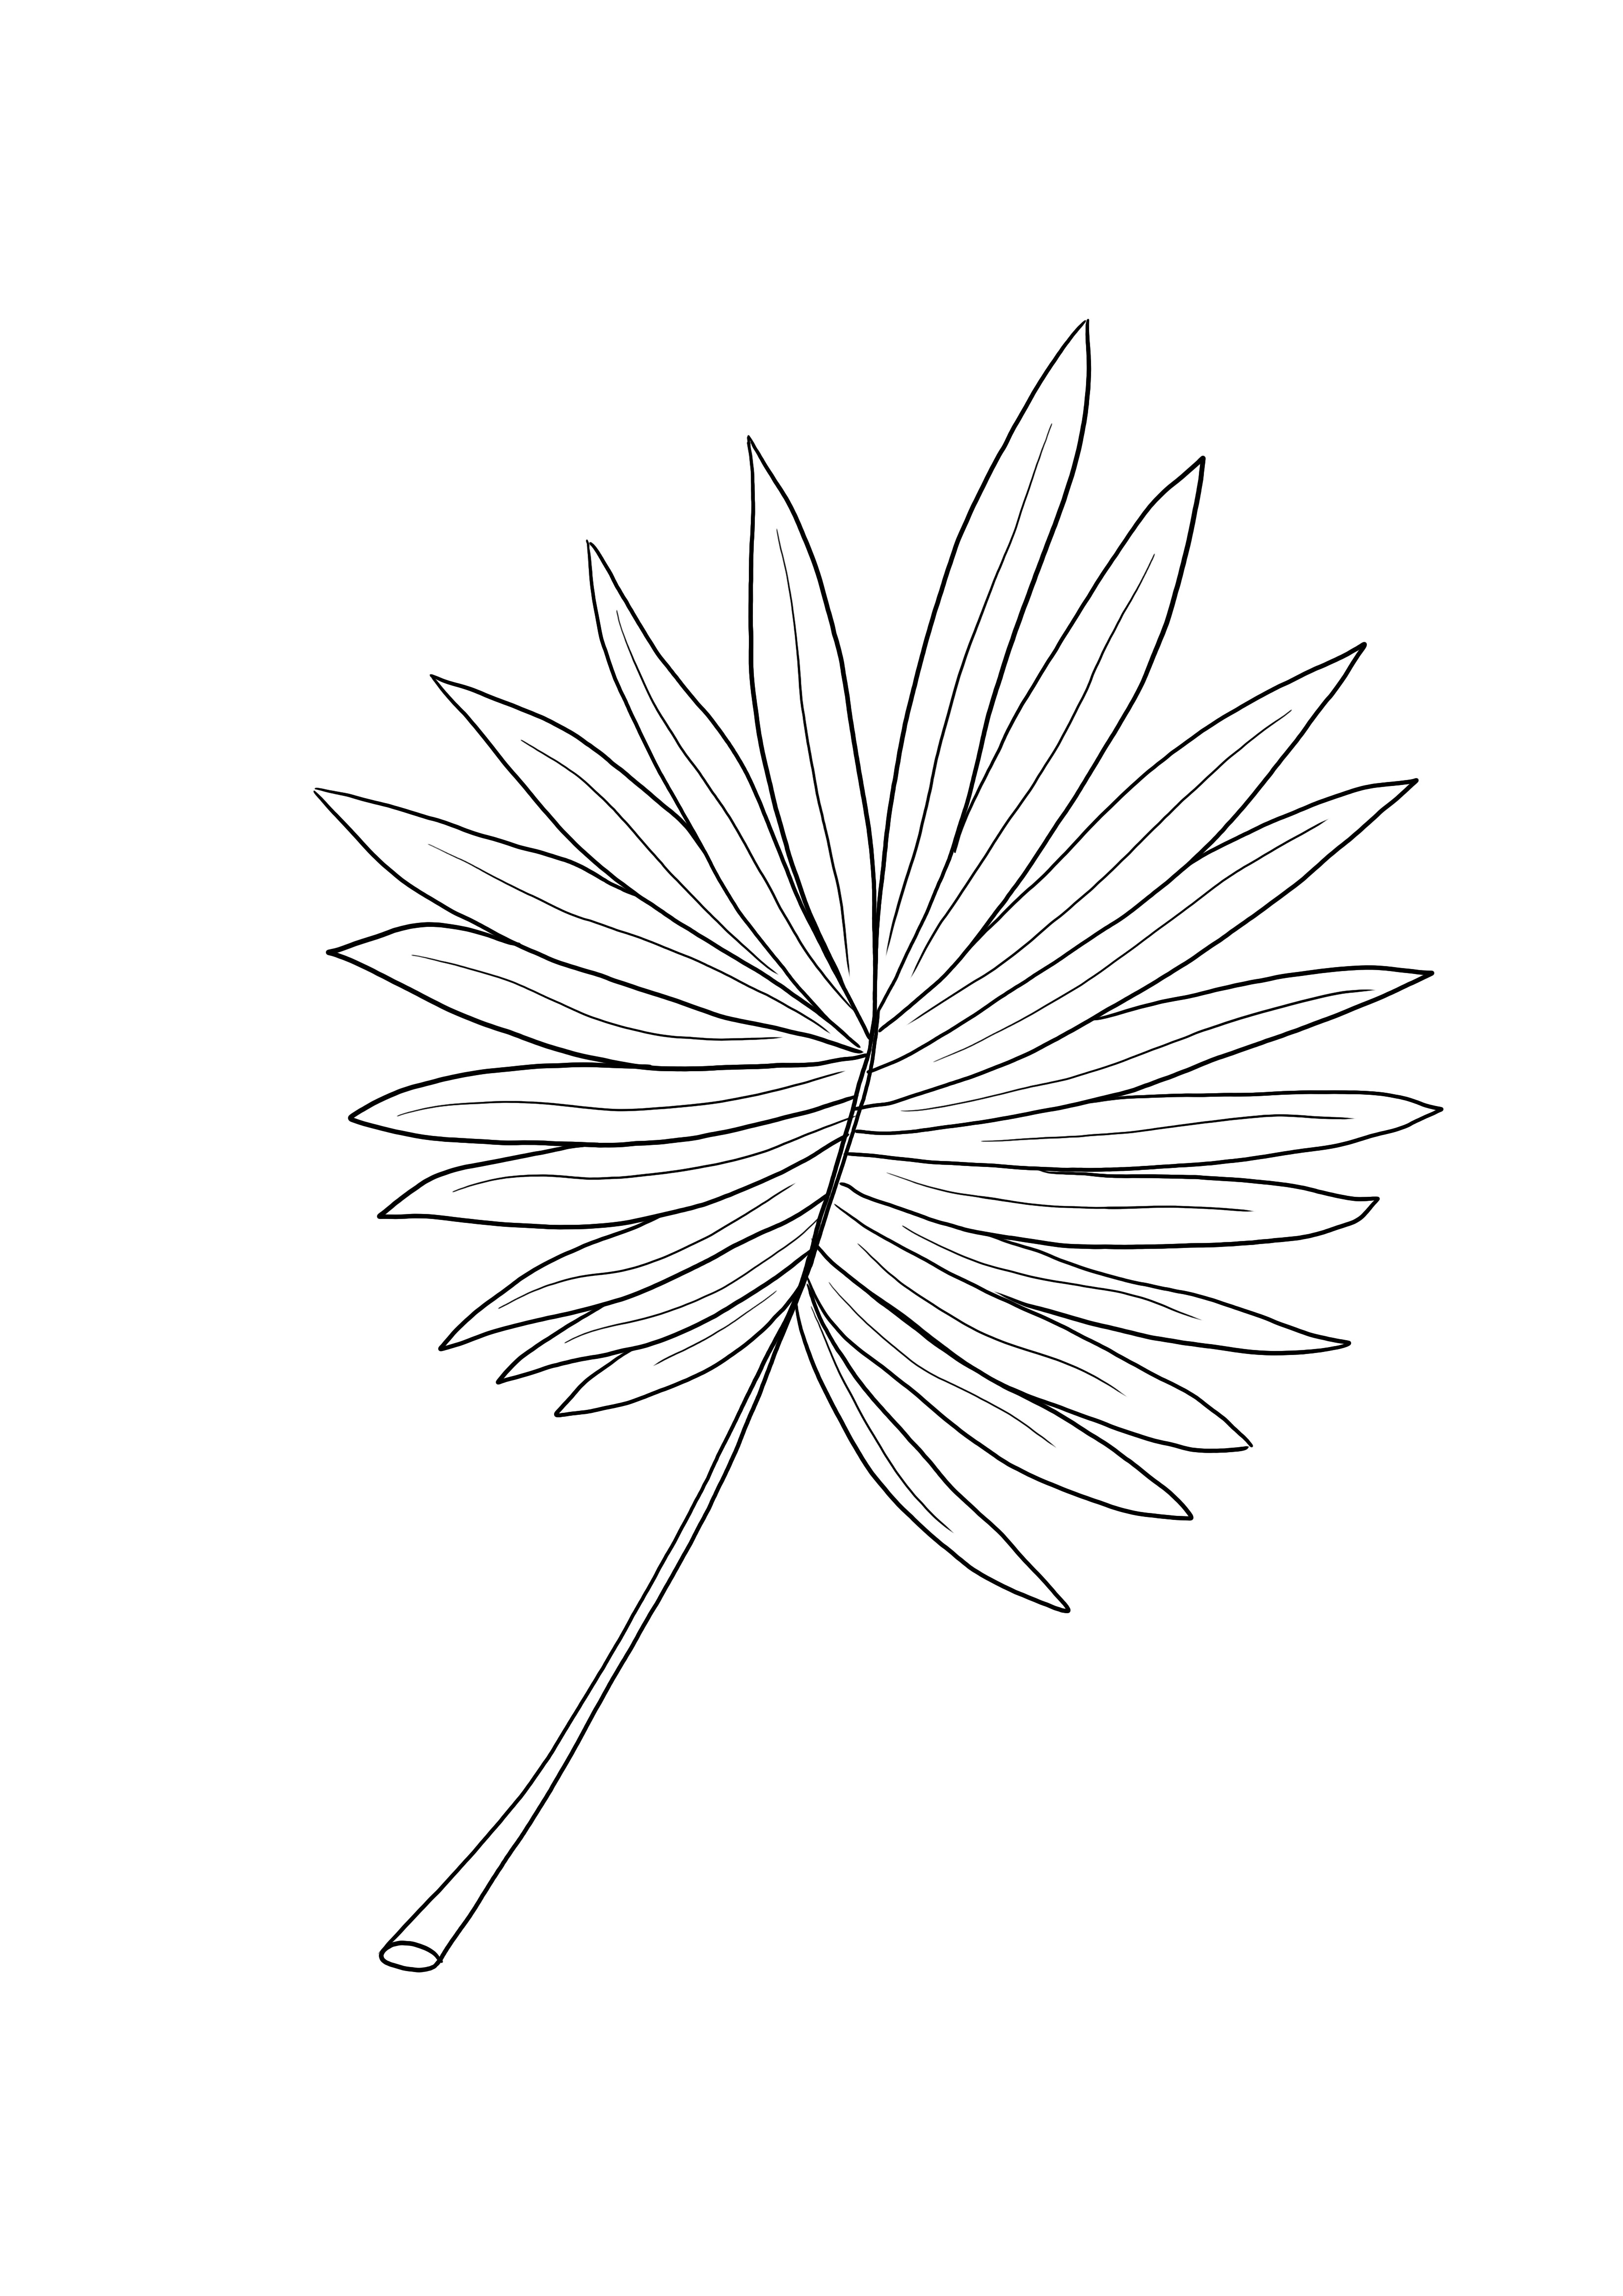 Palm Leaf for free coloring and learning about trees and nature